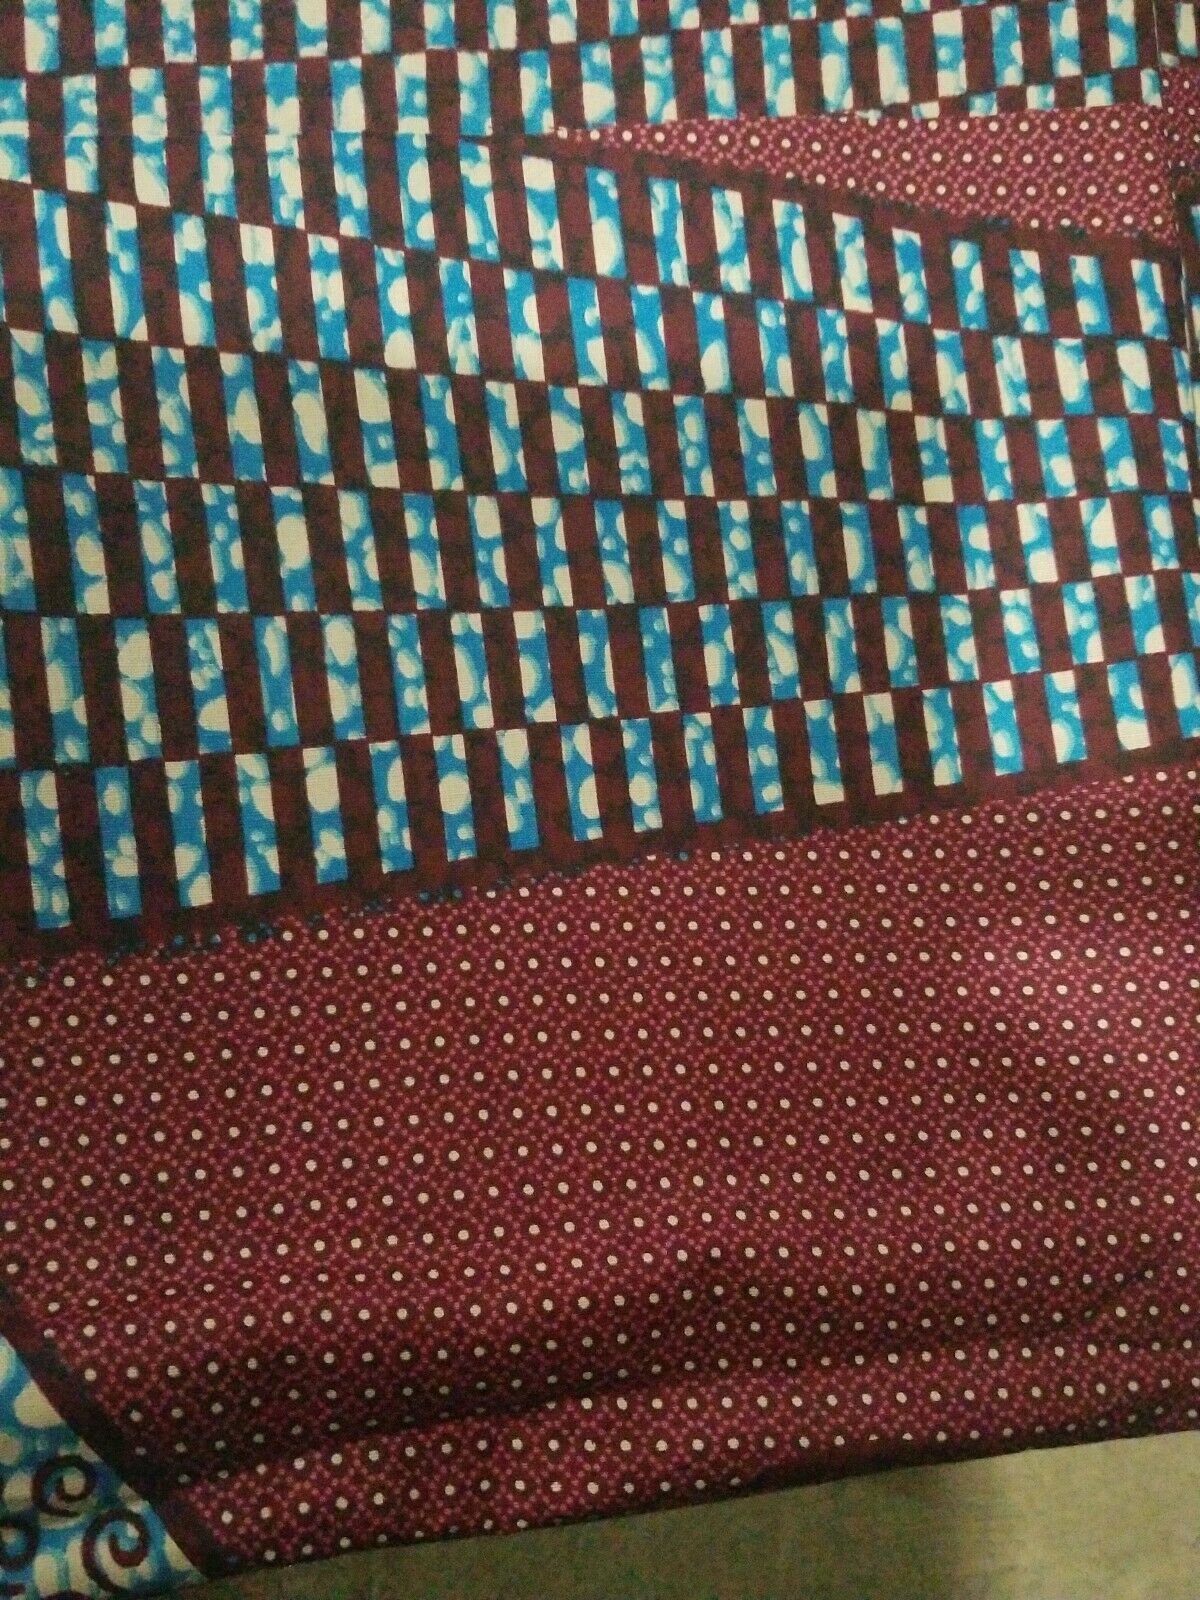 Brown MultiAfrican Print 100% Cotton Fabric ~2yards×46"~$12